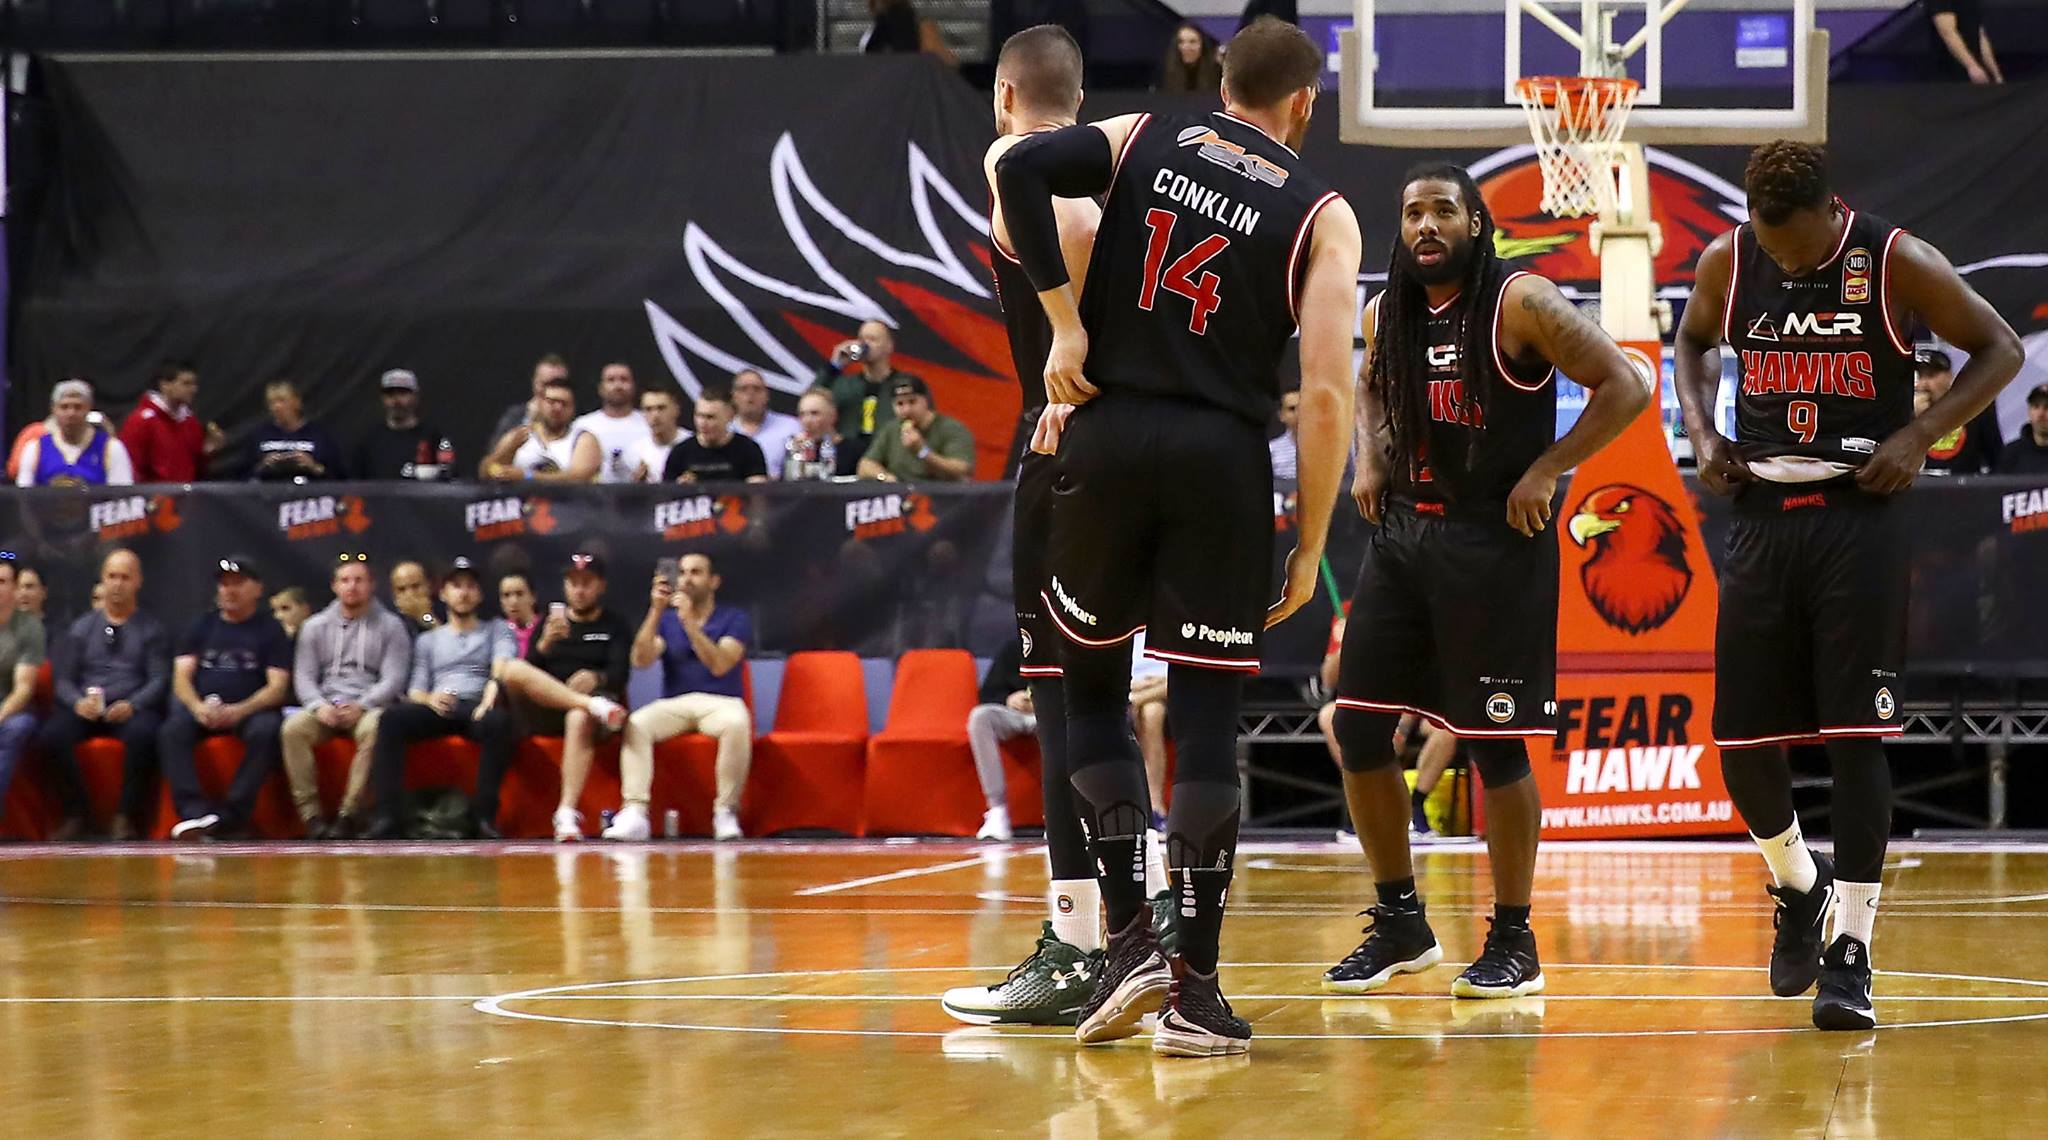 ACT signs deal with Illawarra Hawks to bring NBL back to Canberra